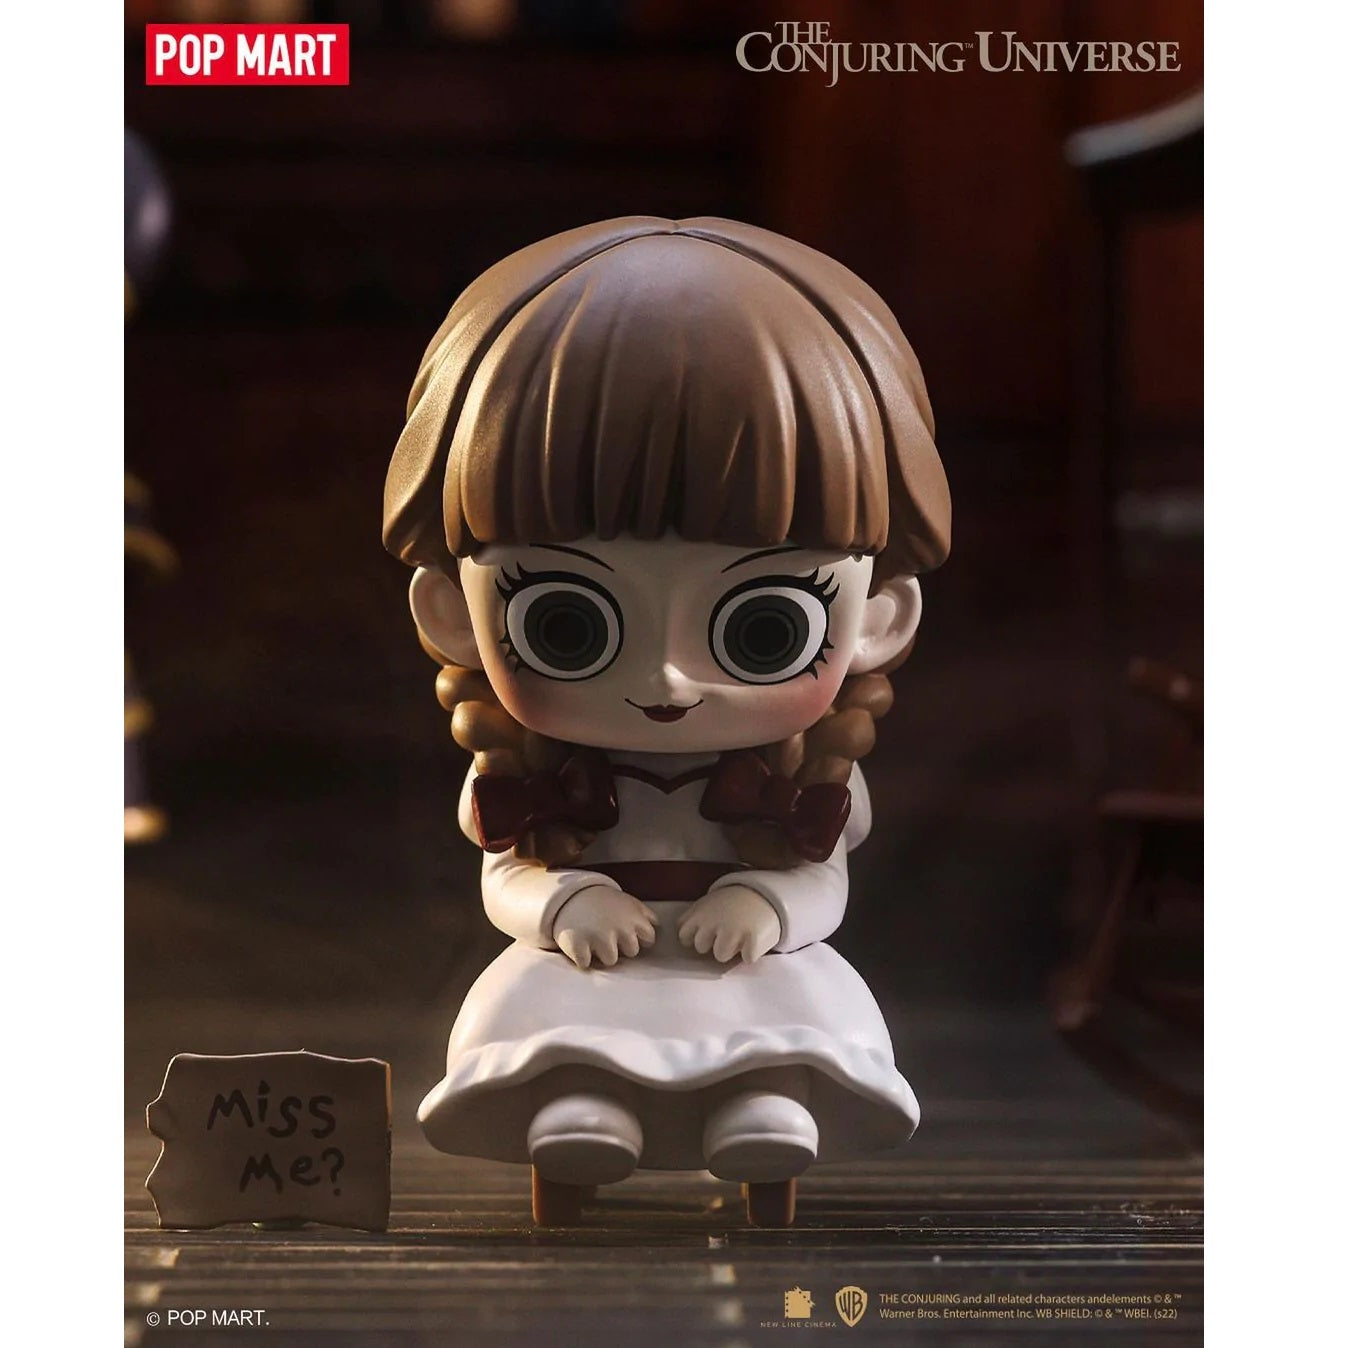 POP MART The Conjuring Universe Series-Single Box (Random)-Pop Mart-Ace Cards & Collectibles